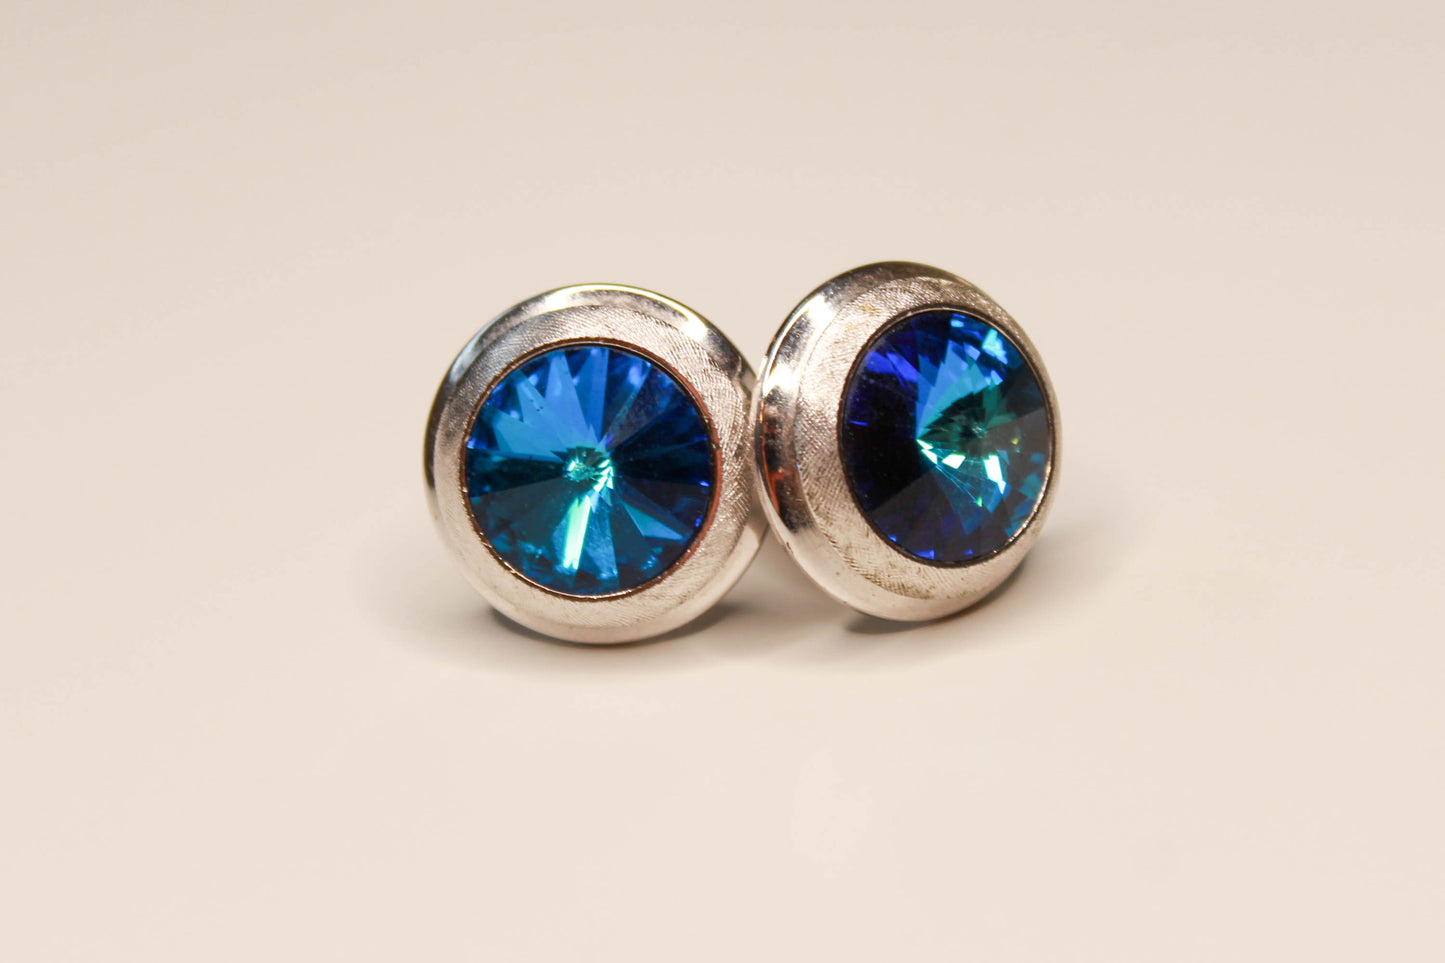 1970s blue glass crystal round cufflinks with silver border vintage gift for him